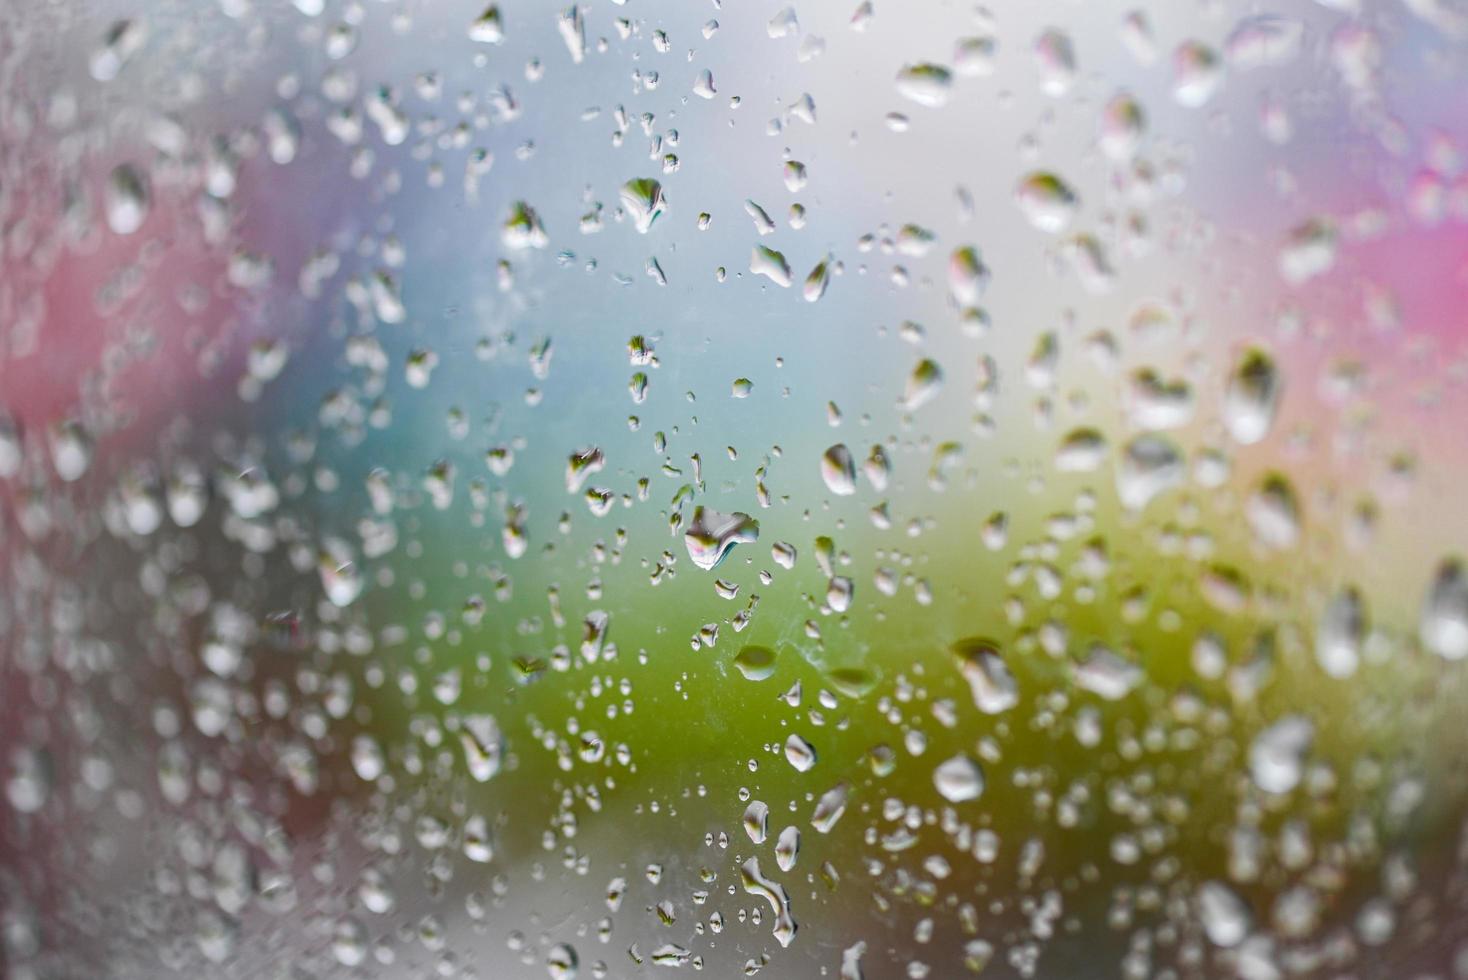 raindrops on glass window in the rainy season, water drop glass background , nature water drop after rain photo